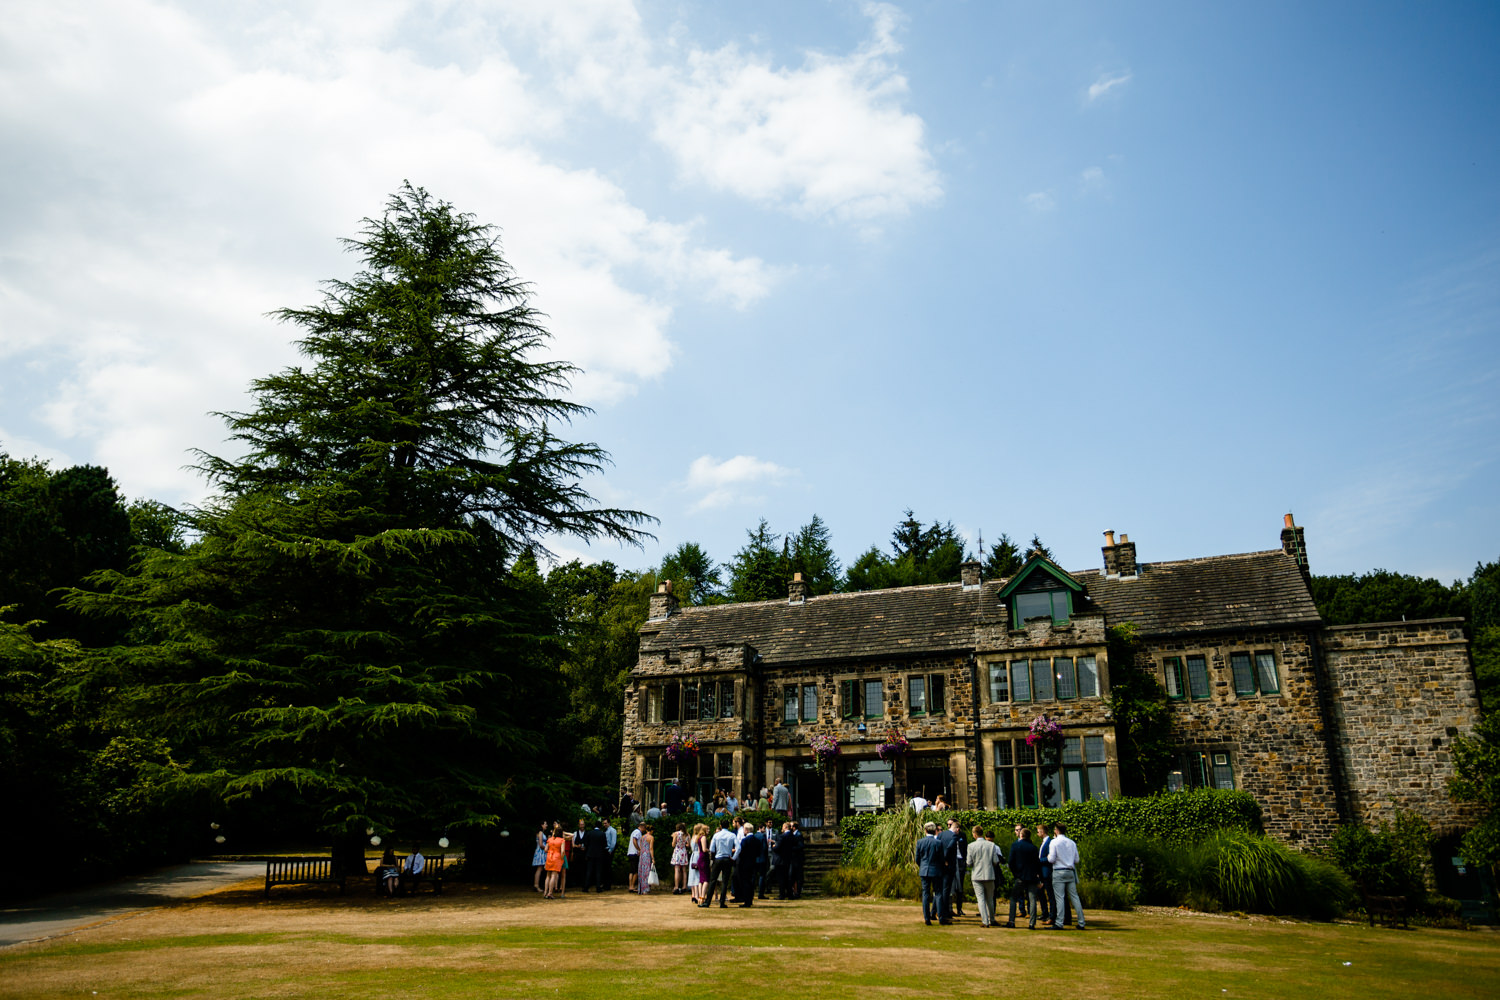 Summer drinks on the lawn, relaxed Whirlowbrook Hall photographers